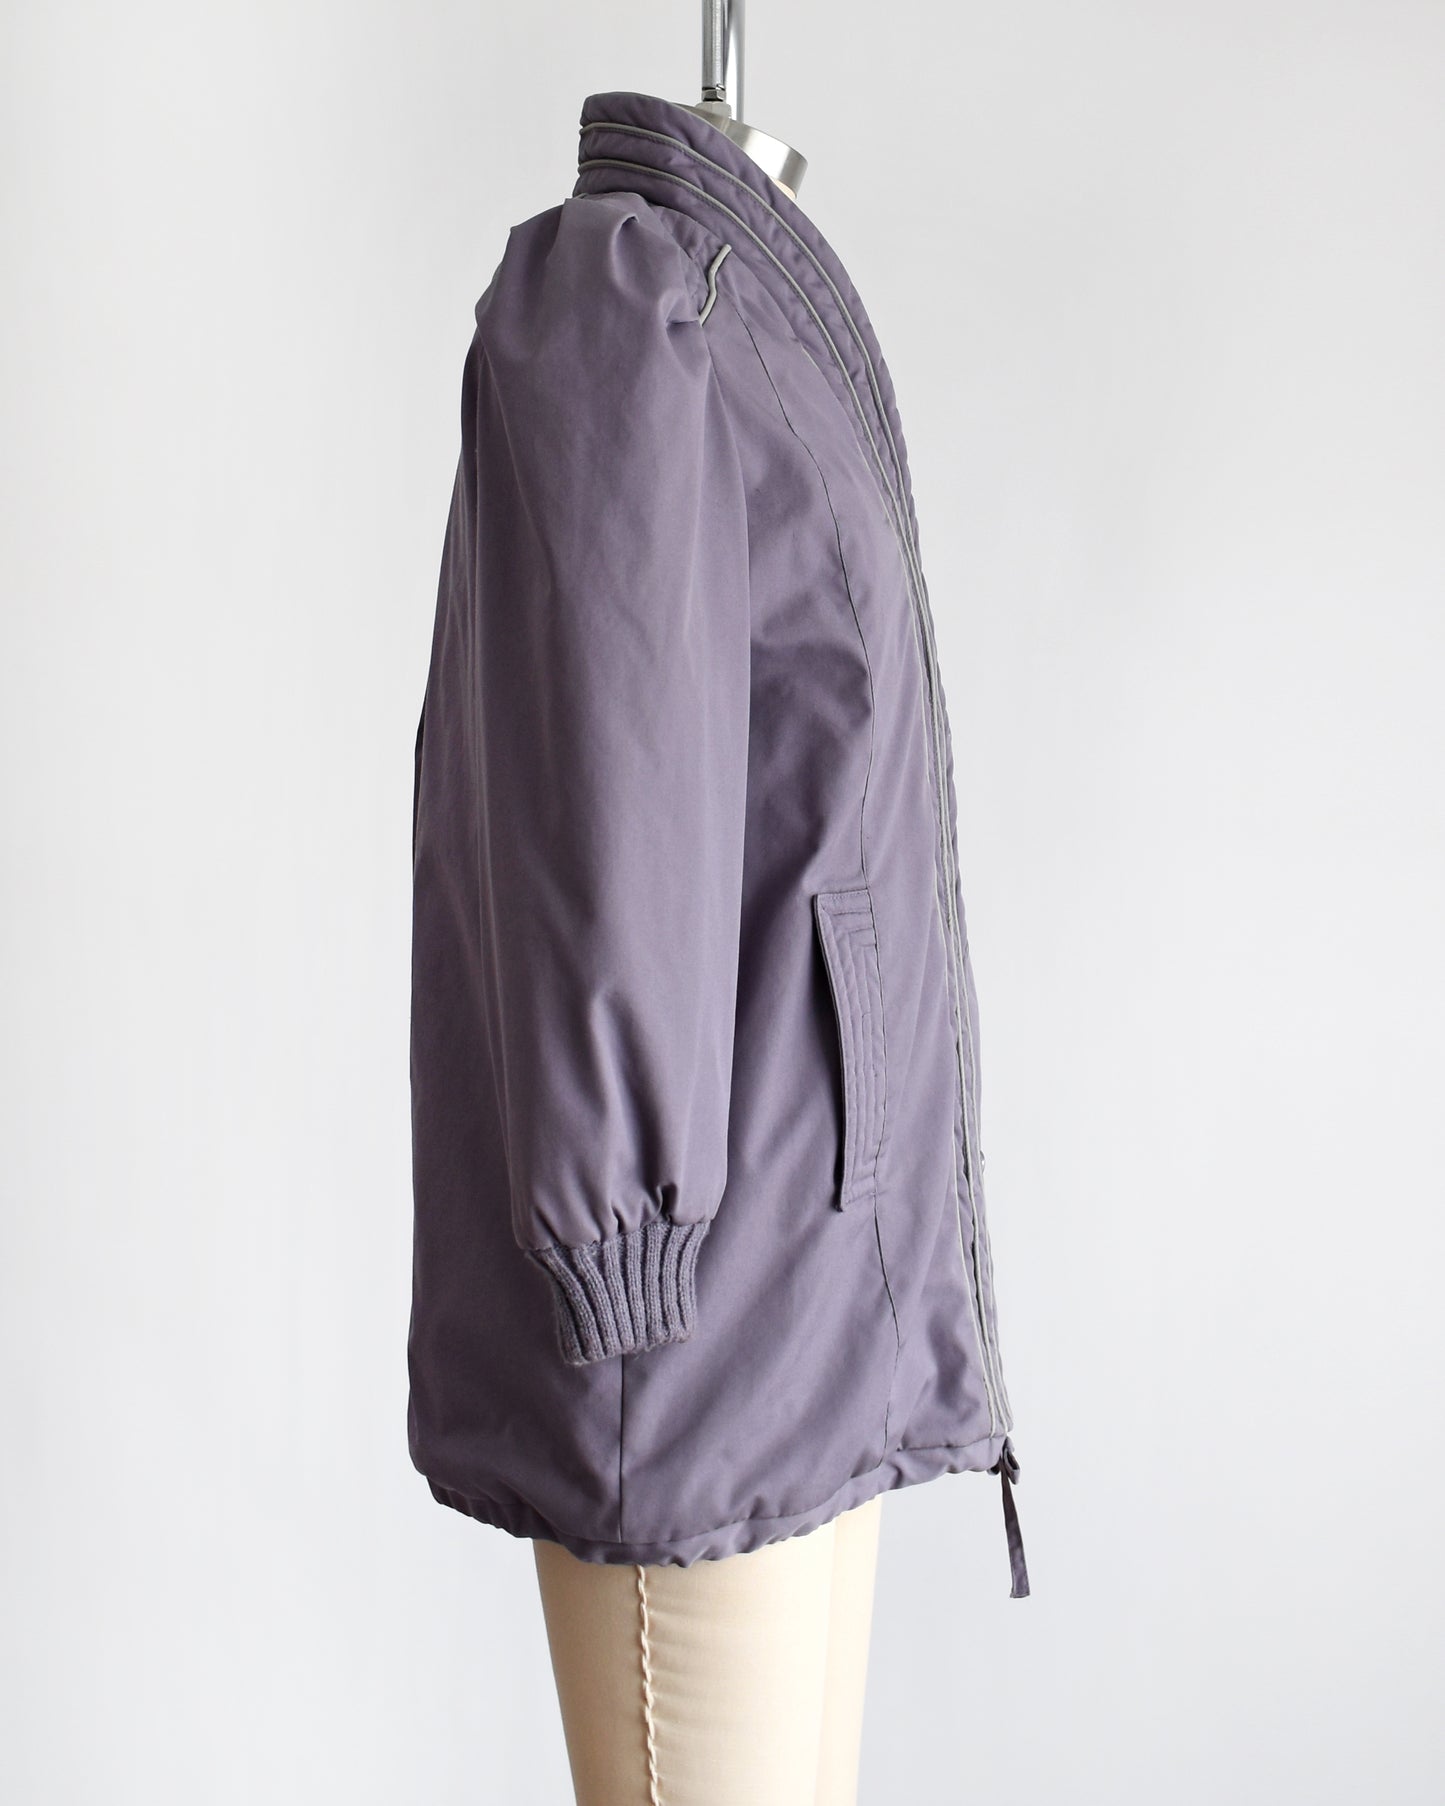 Side view of a vintage 1980s purple puffy coat with shawl style collar with gray trim